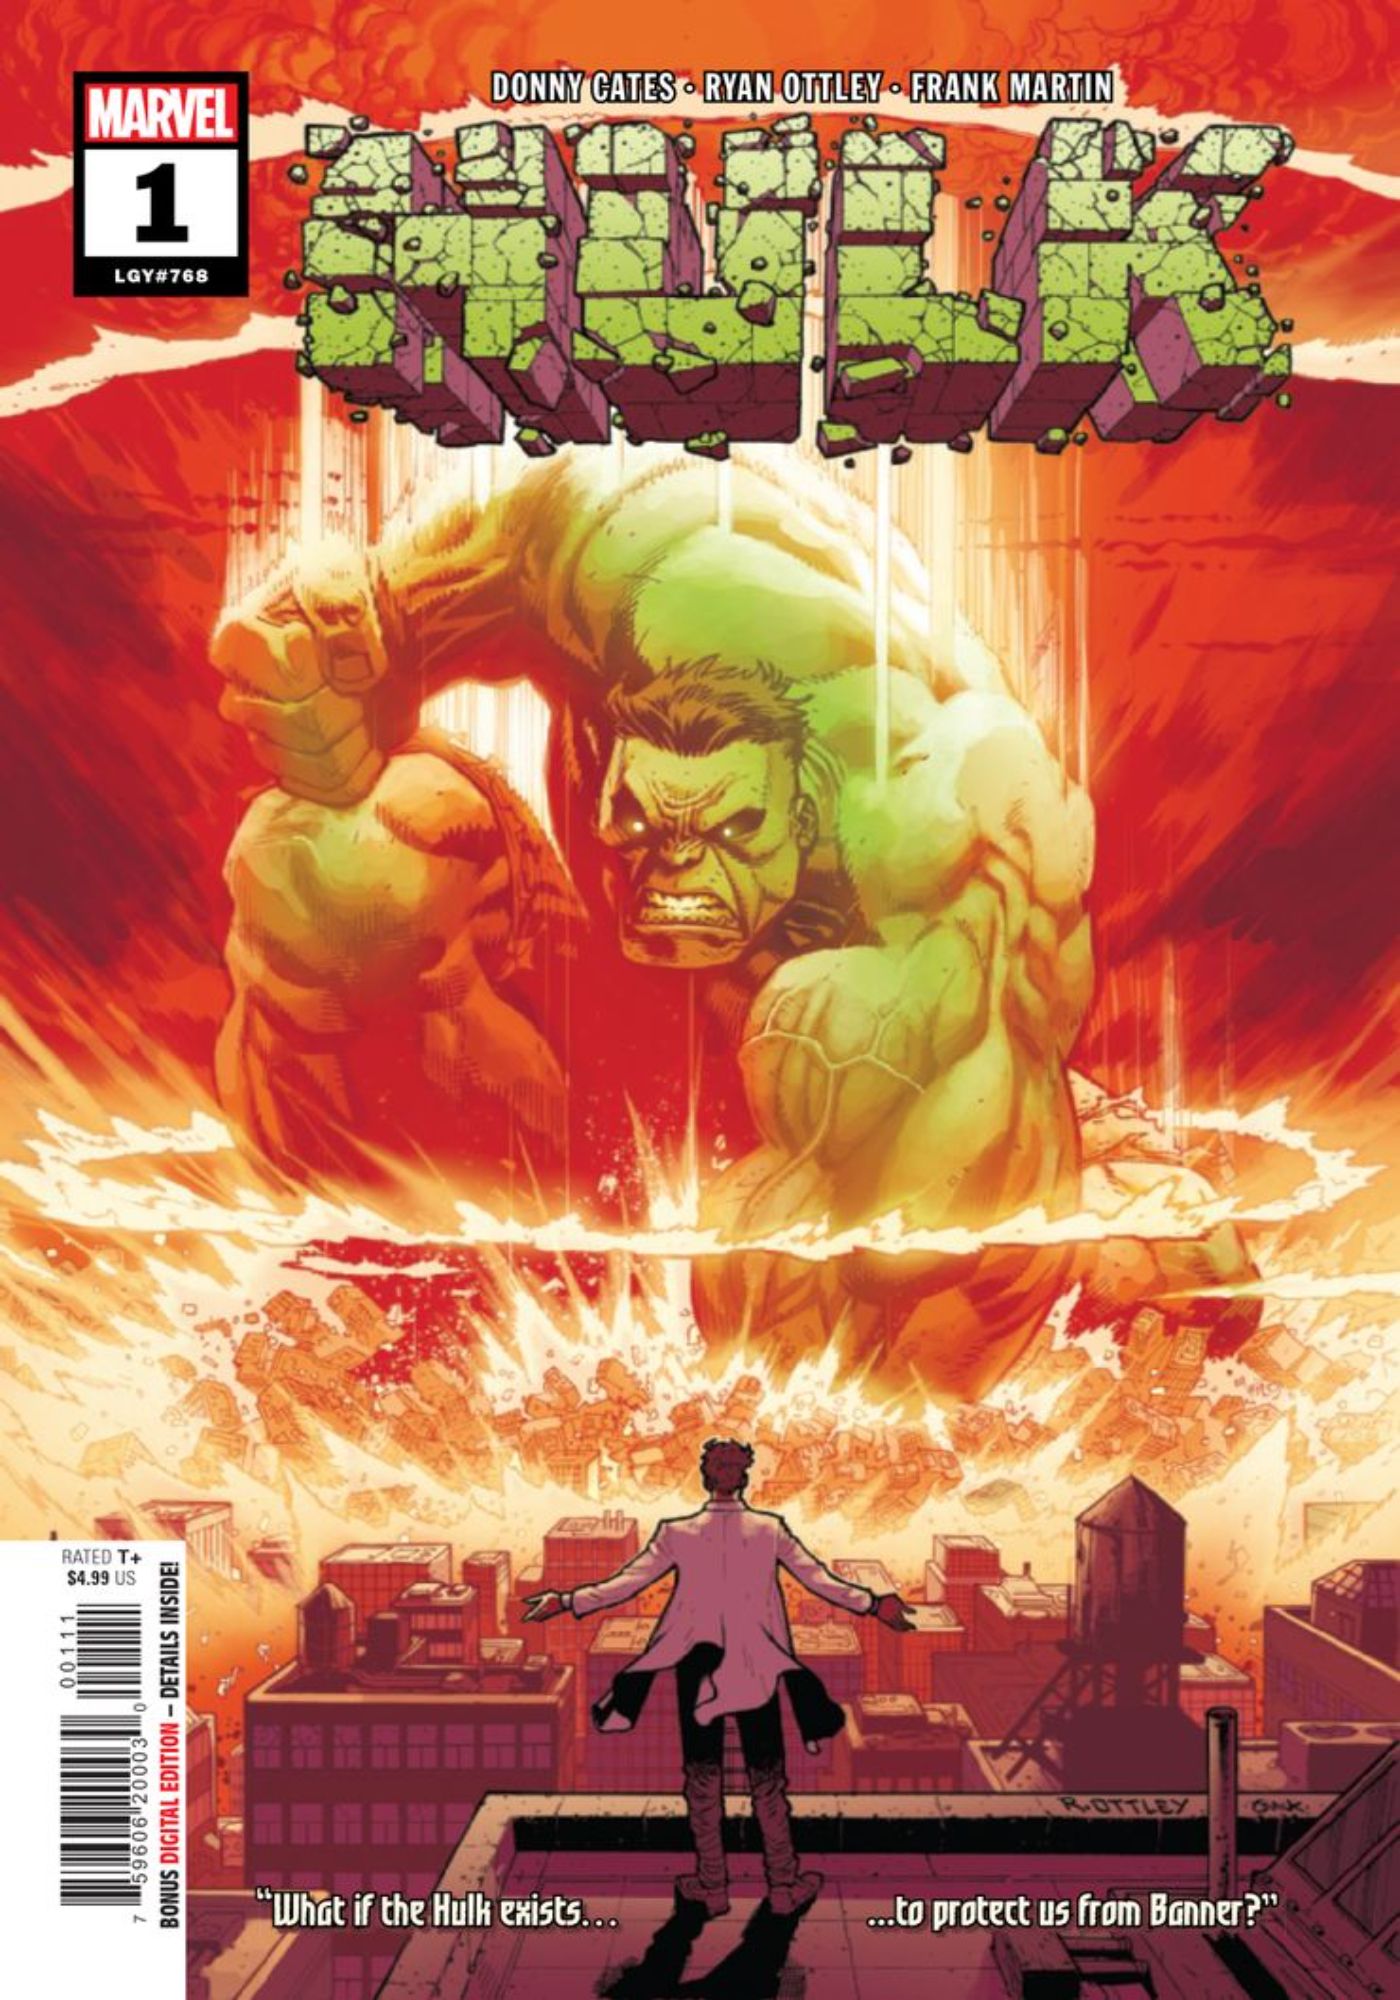 The Hulk Is Protecting The World From Bruce Banner in New Series